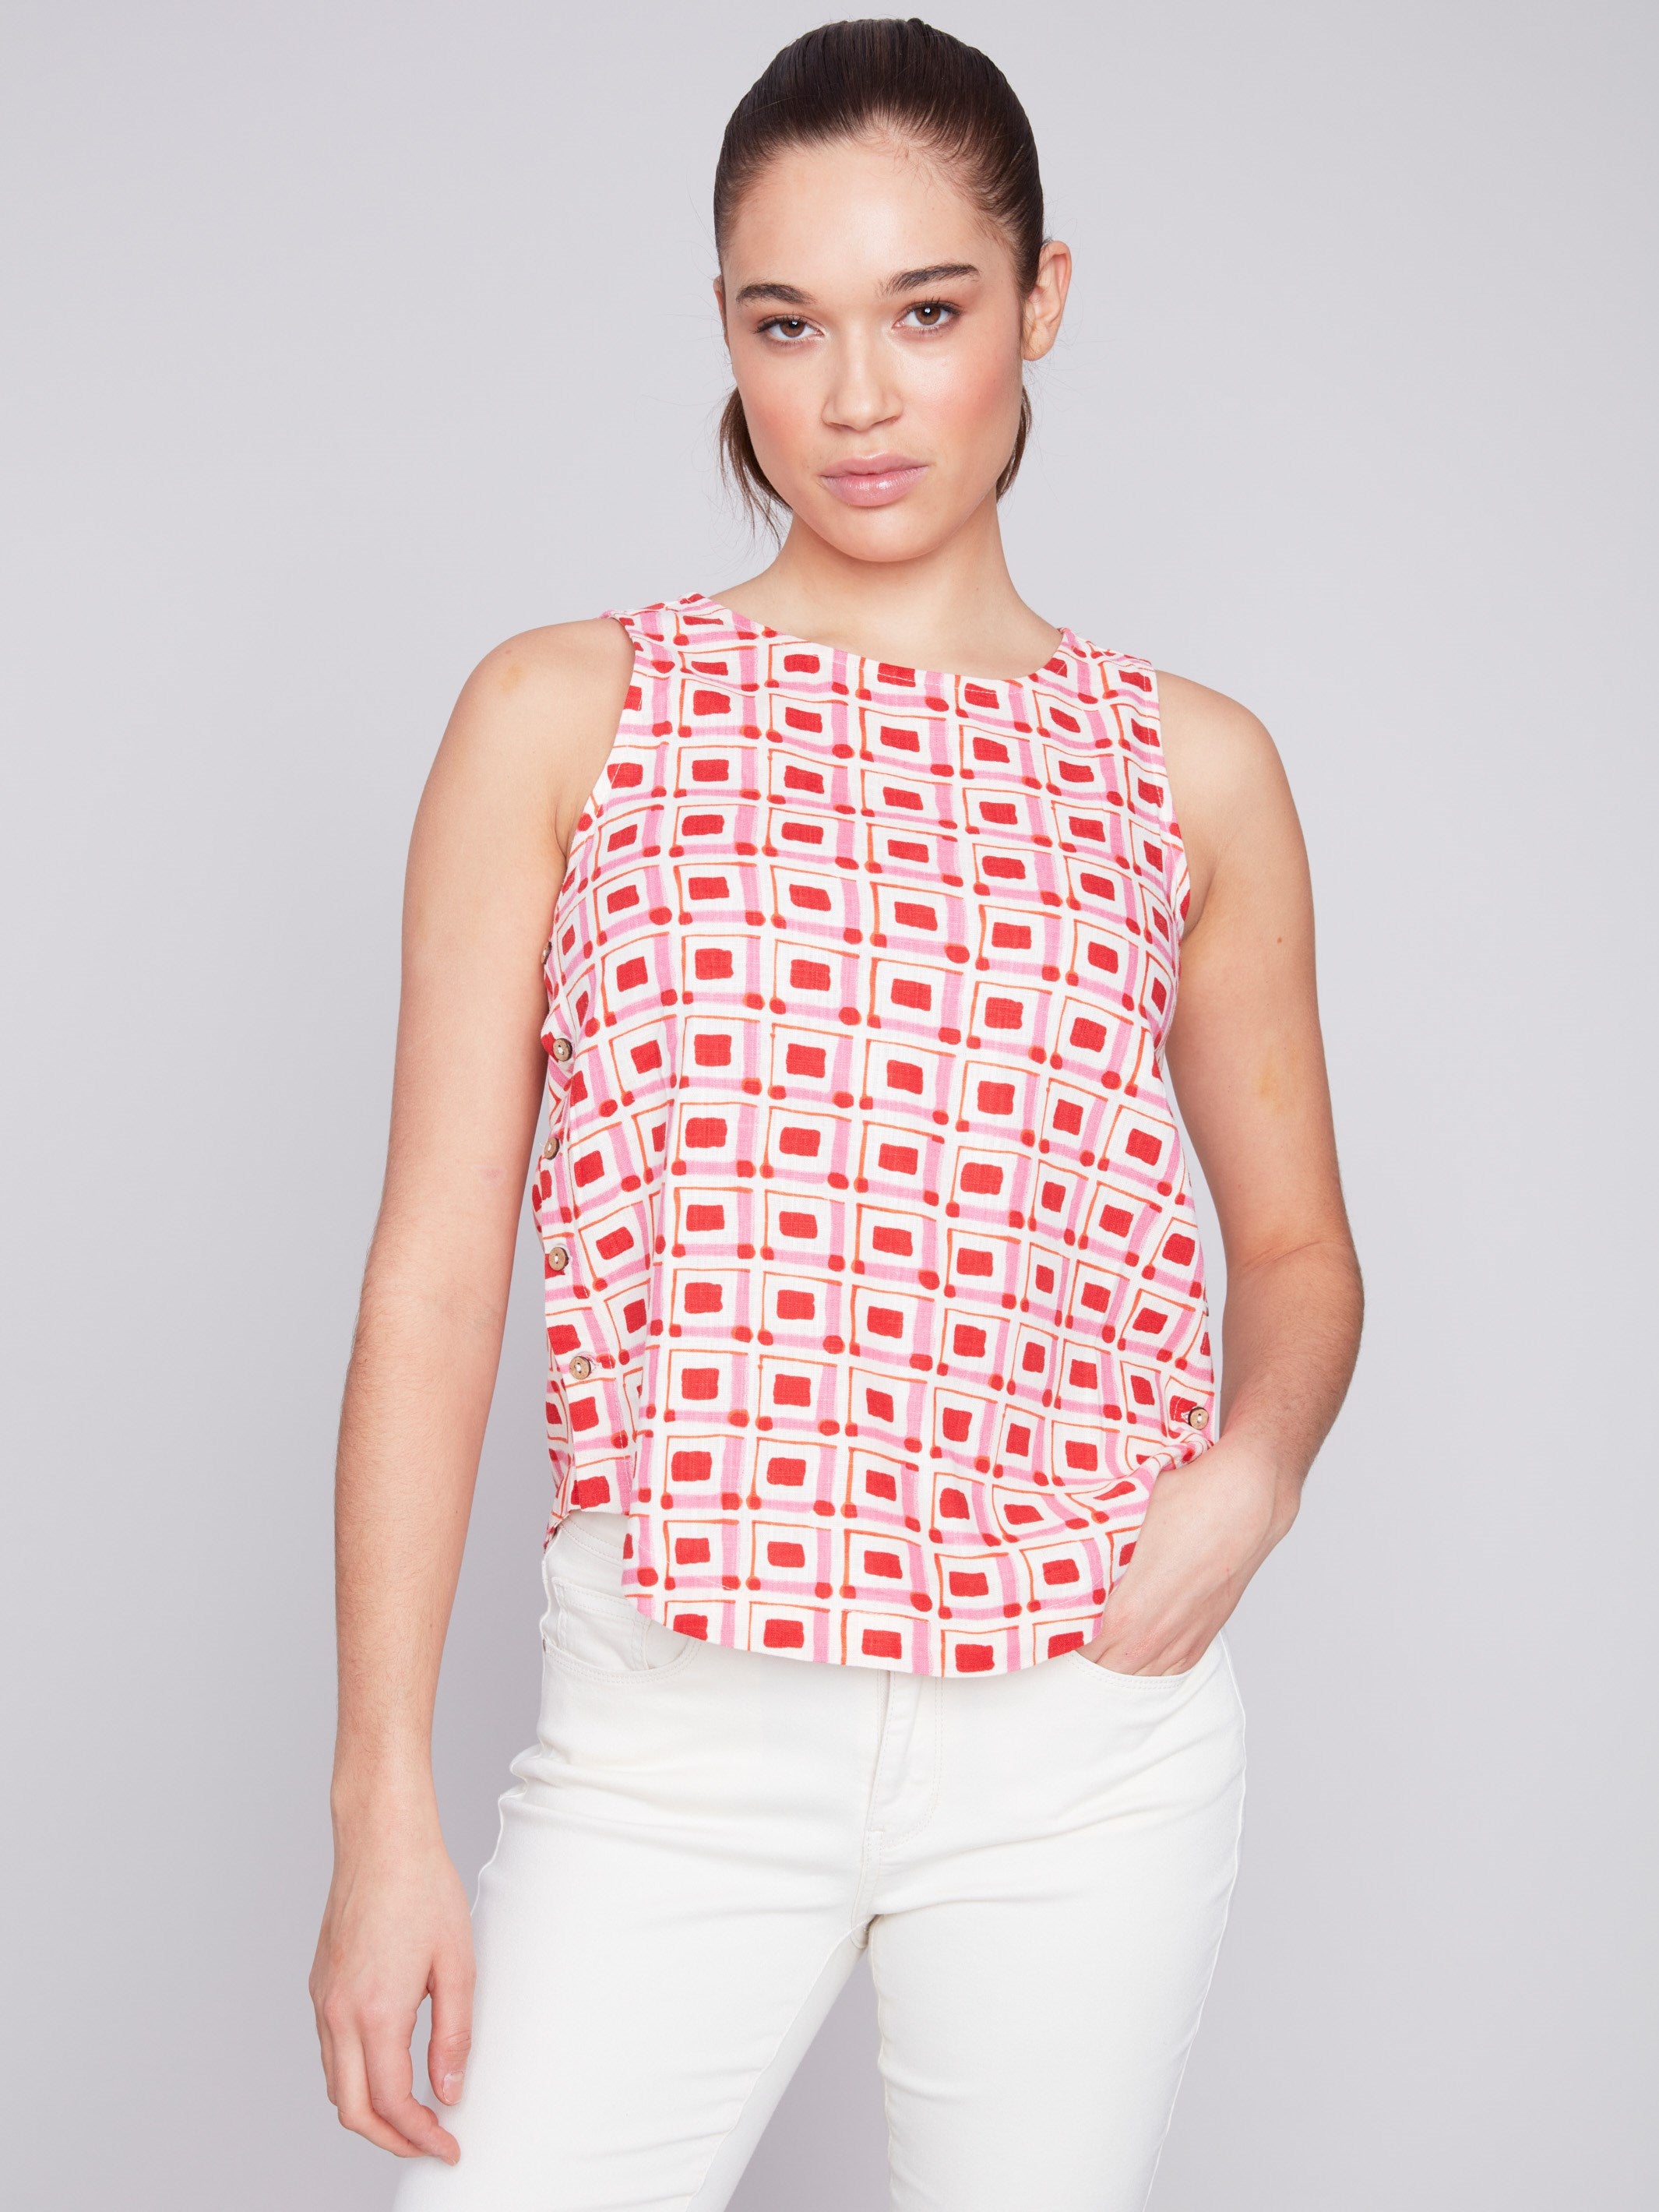 Printed Sleeveless Top with Side Buttons - Cherry - Charlie B Collection Canada - Image 1